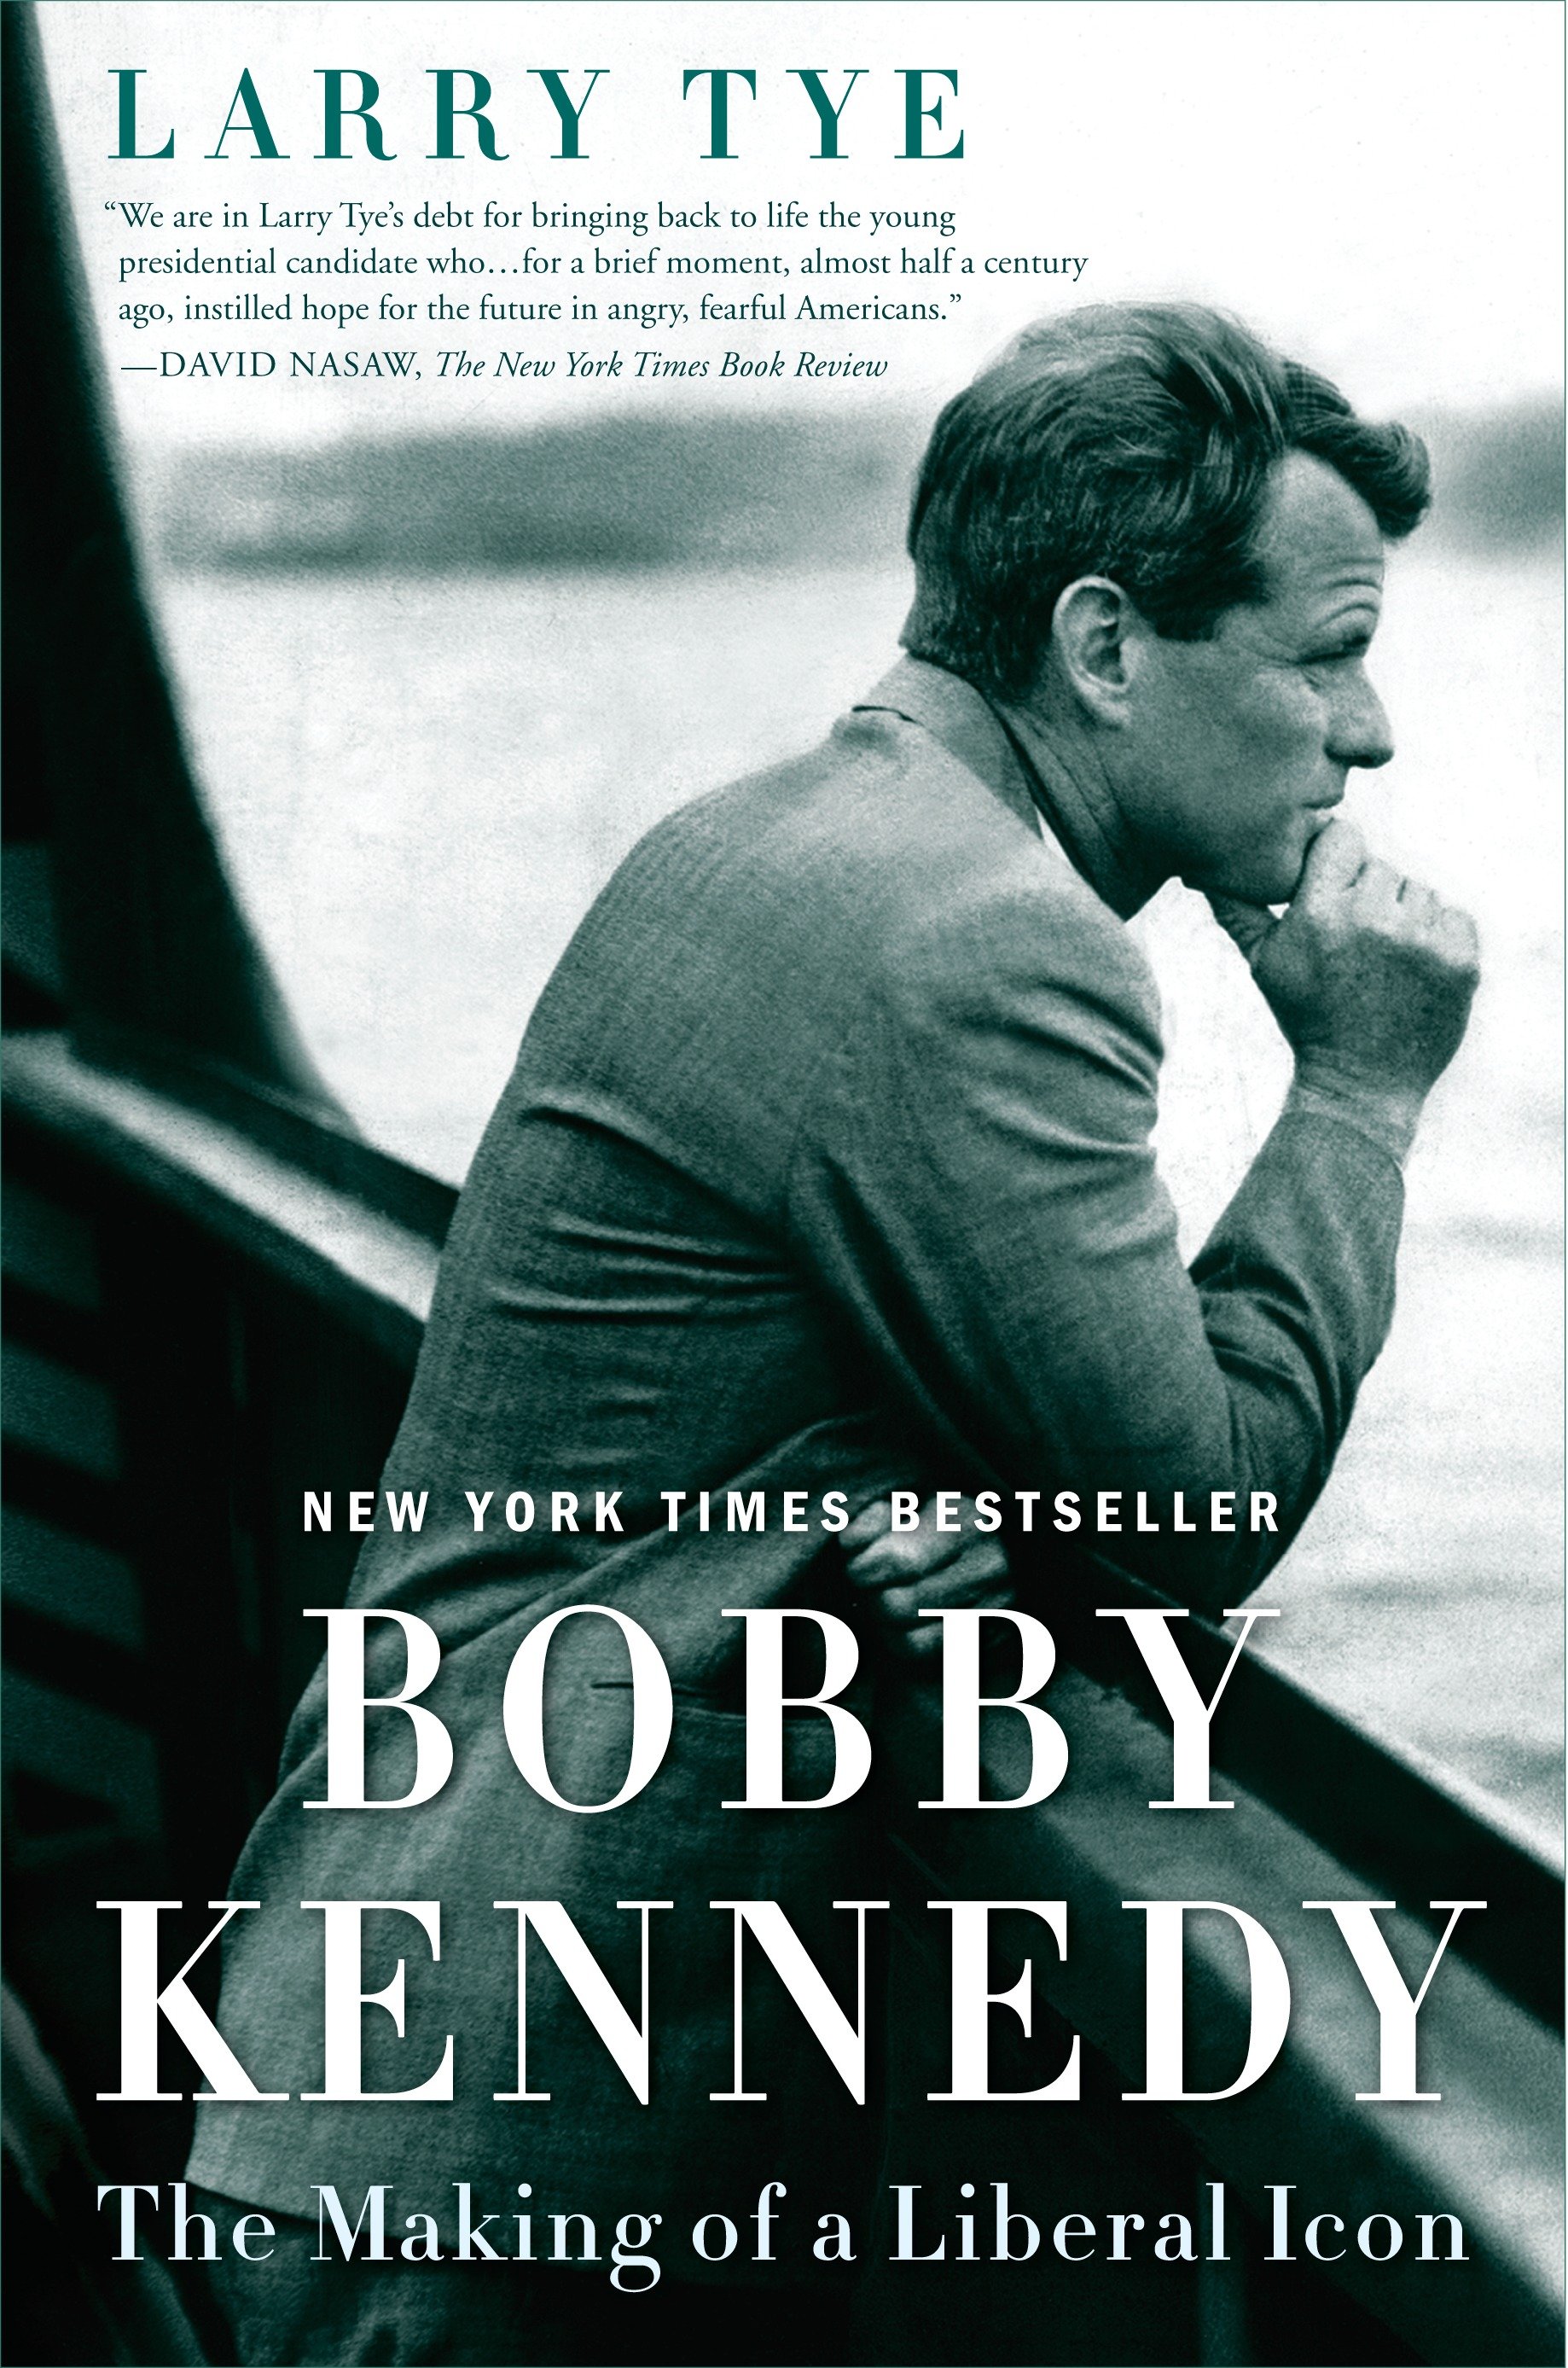 Bobby Kennedy the making of a liberal icon cover image